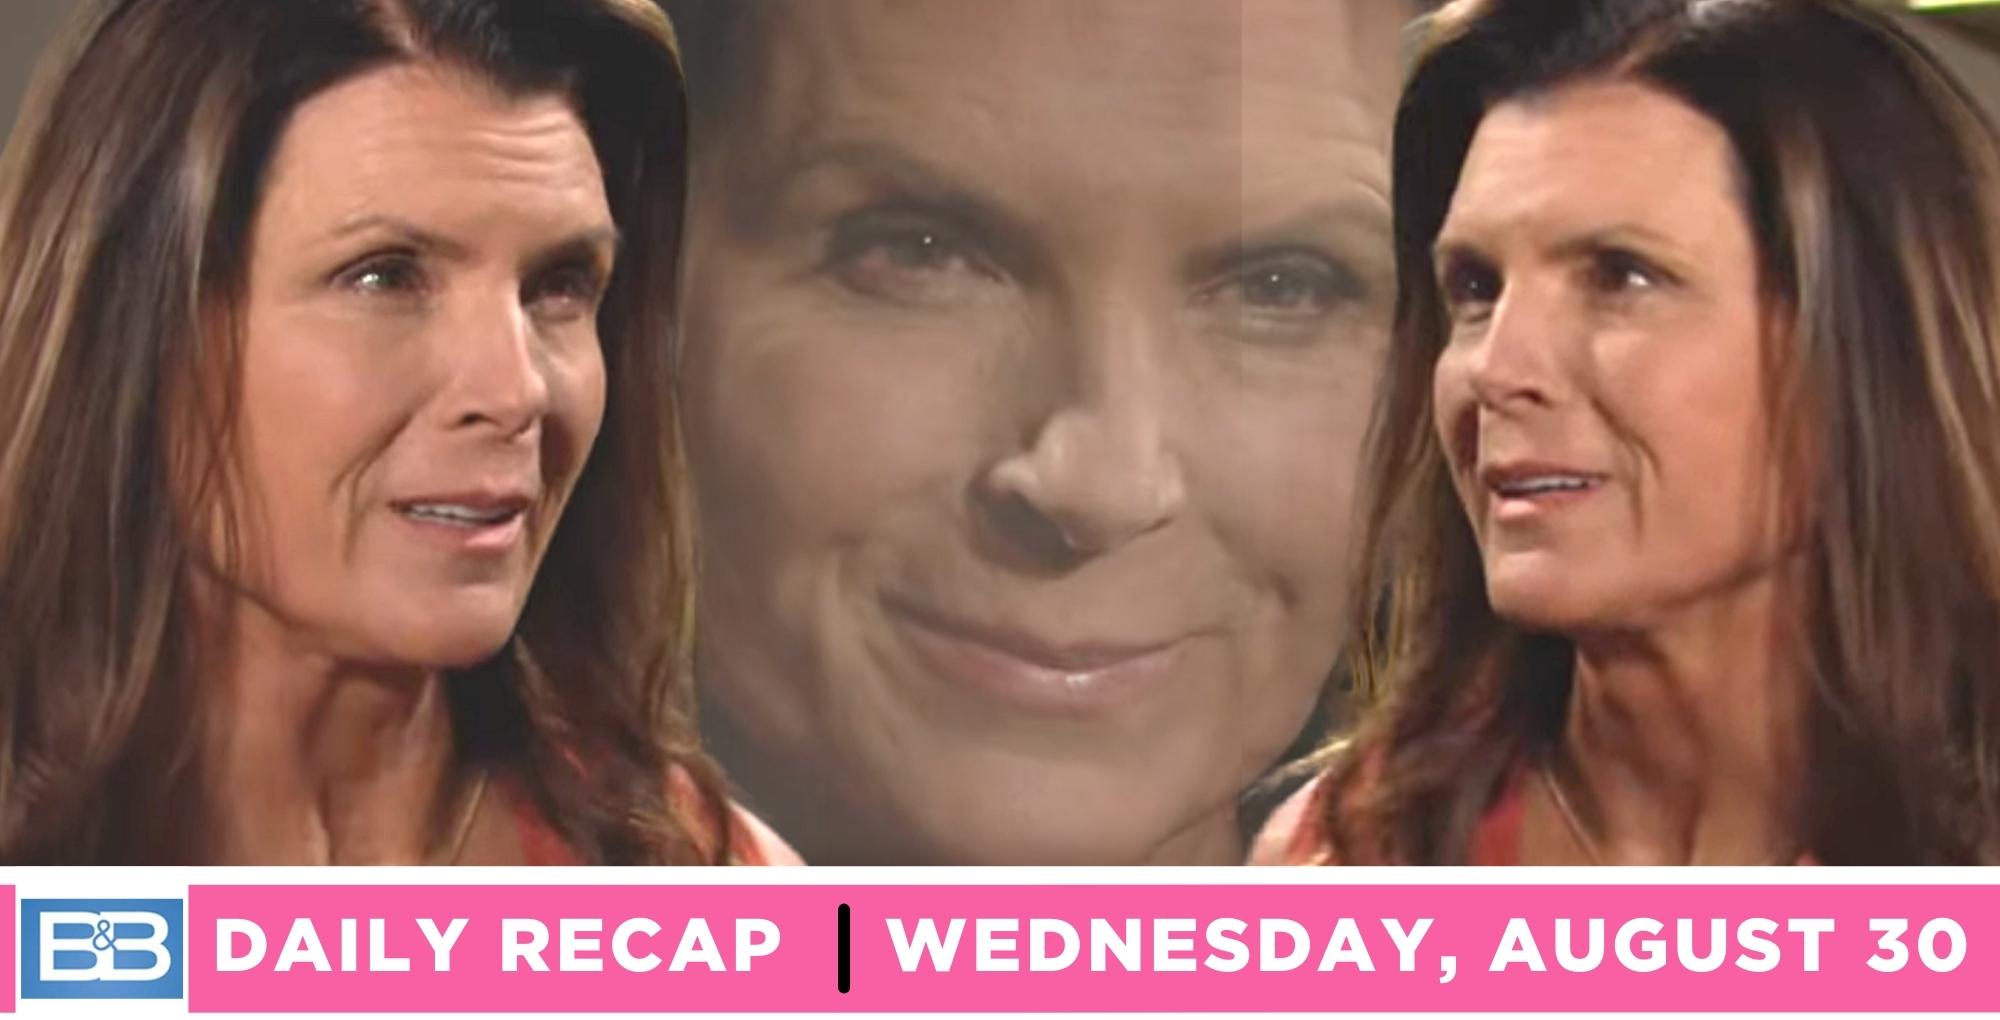 the bold and the beautiful recap for wedneday, august 30, 2023, multiple images of sheila.